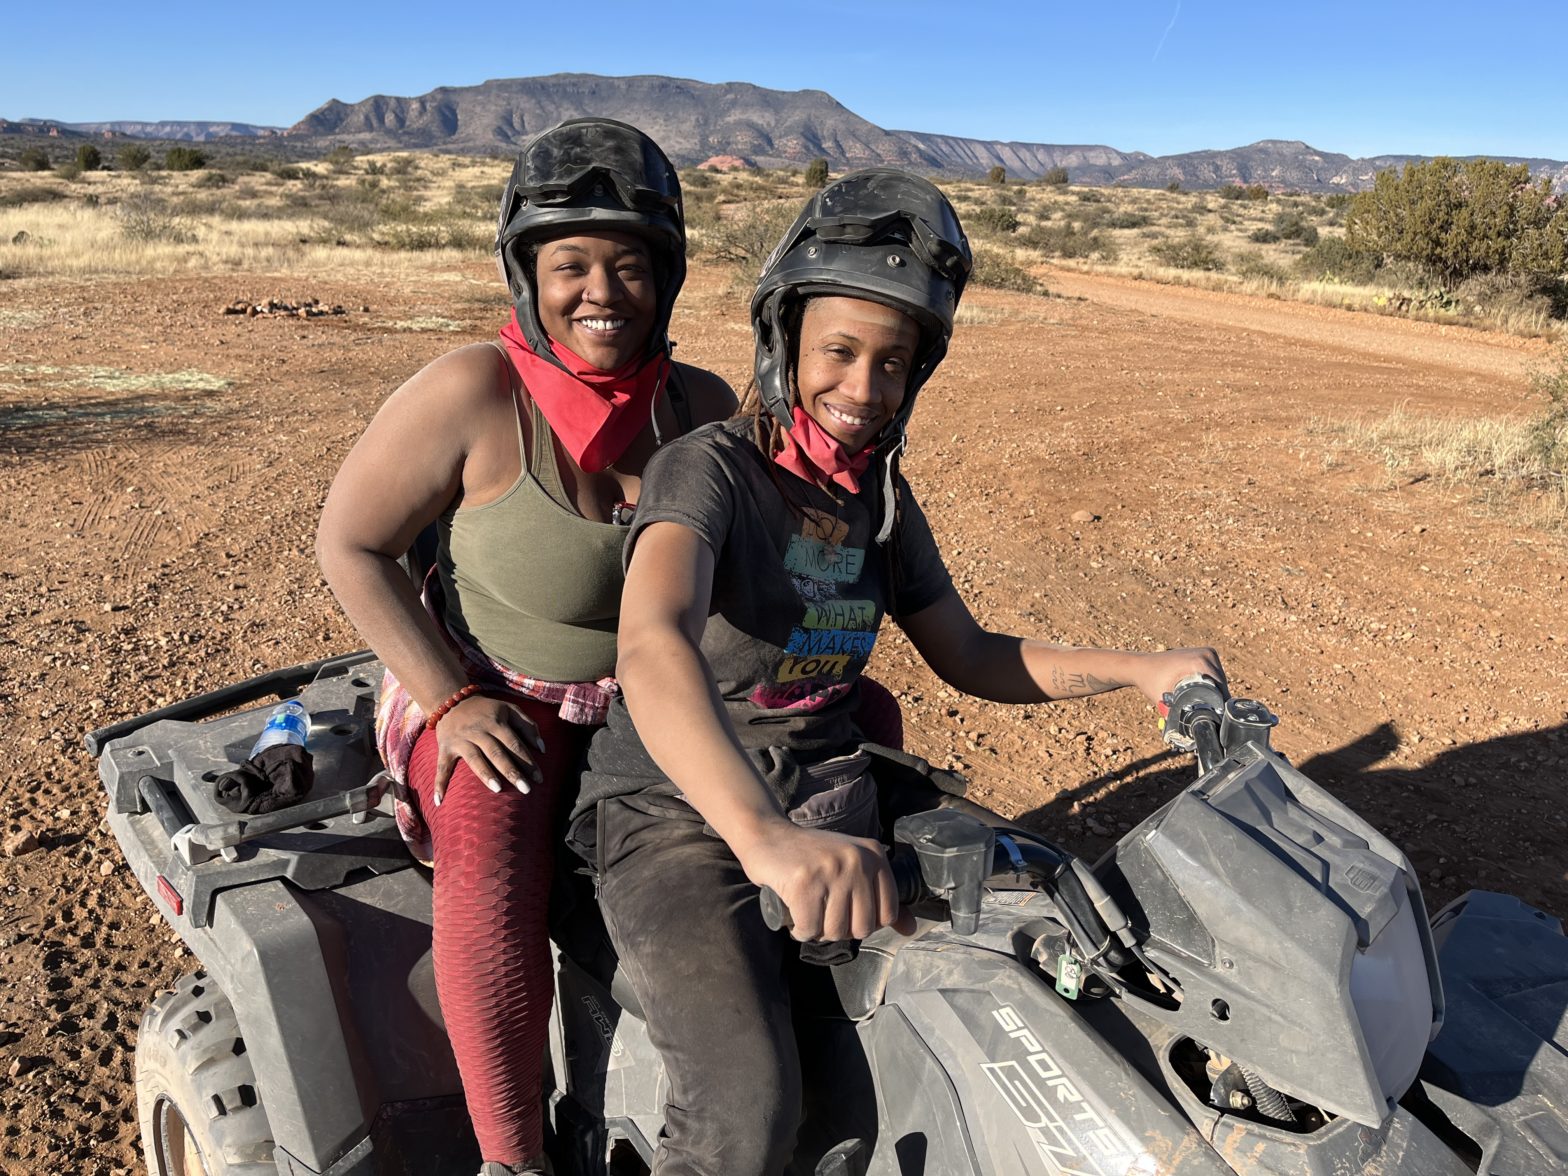 Traveler Story: 'Our Baecation To Sedona, Arizona Was Something We'll Never Forget'